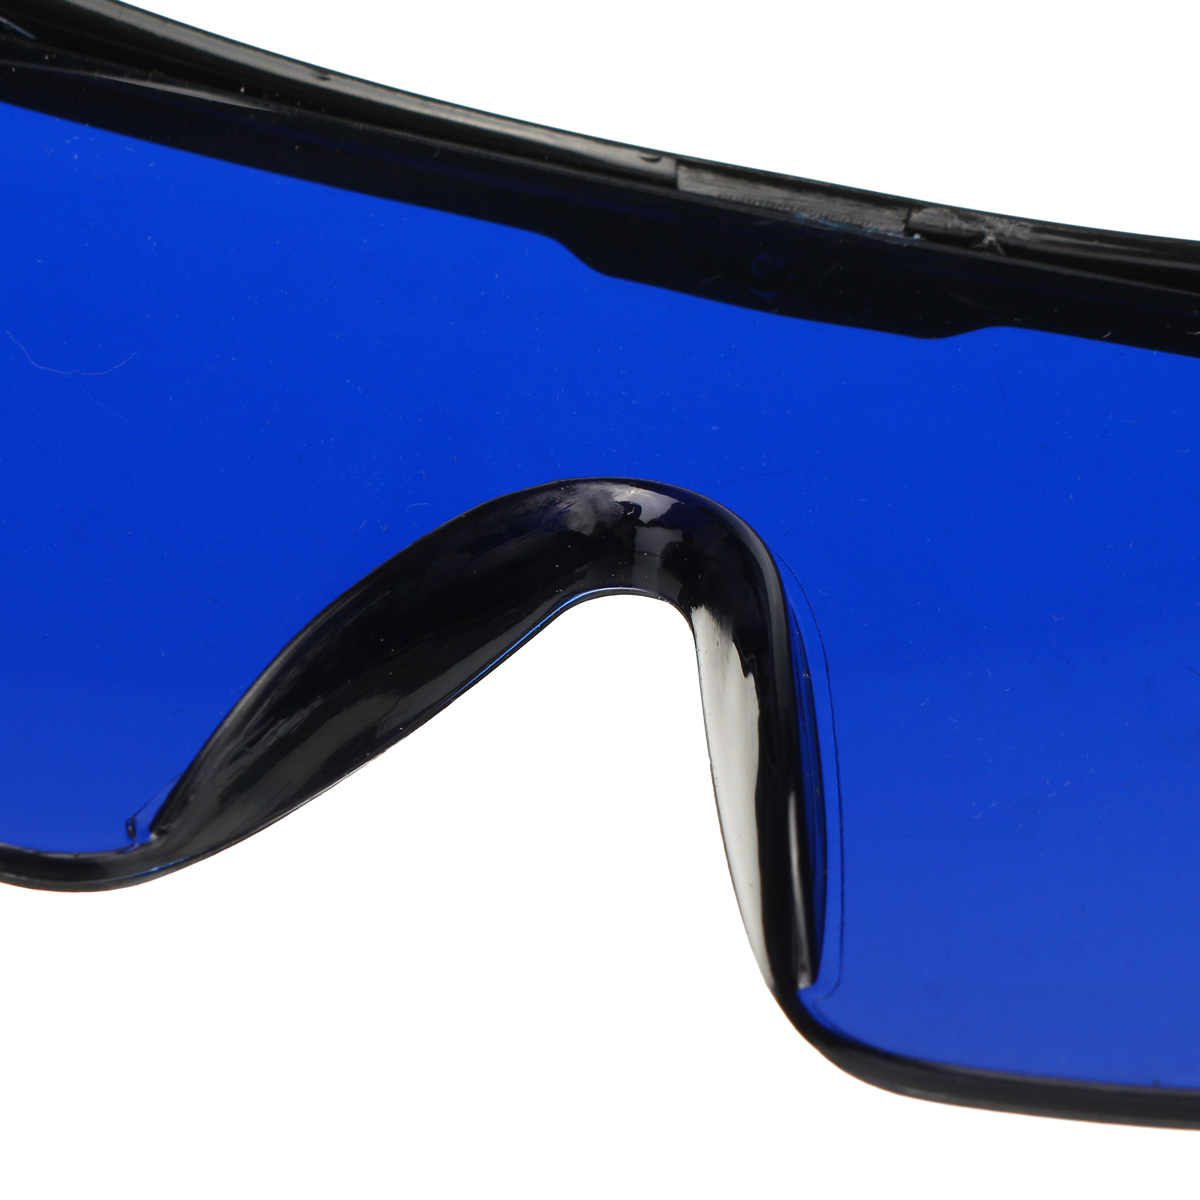 Pro-Laser-Protection-Goggles-Protective-Safety-Glasses-IPL-OD4D-190nm-2000nm-Laser-Goggles-1424199-9